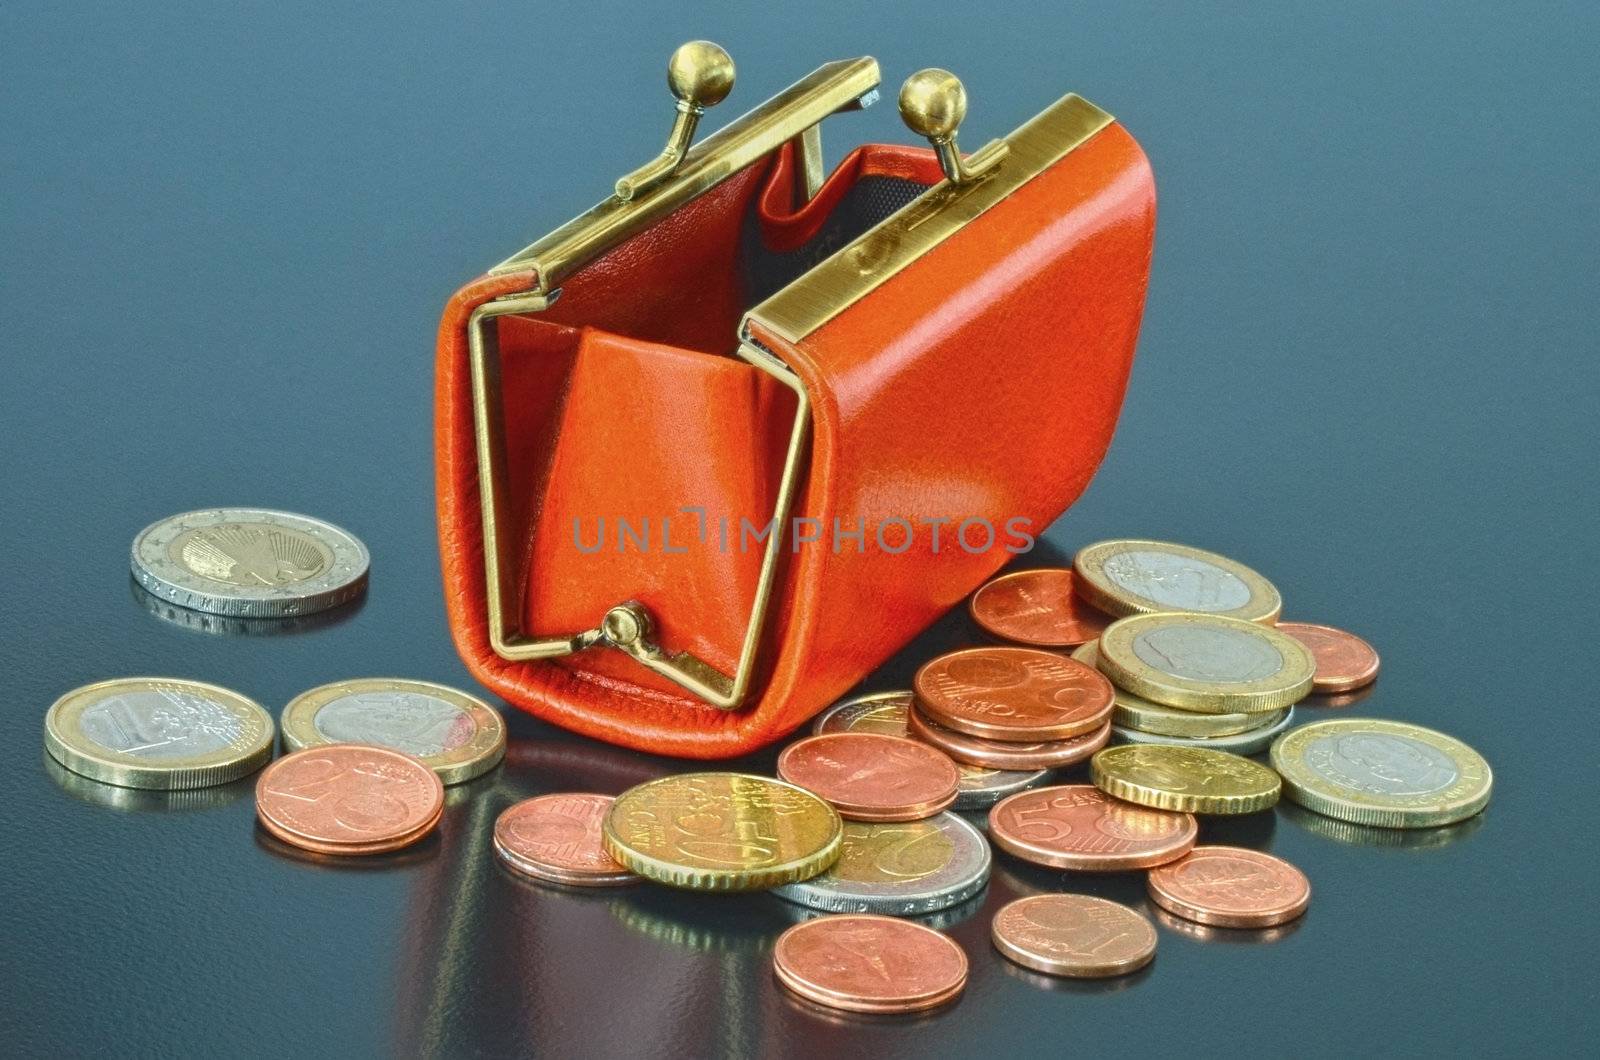 Purse and euro coins by Vectorex